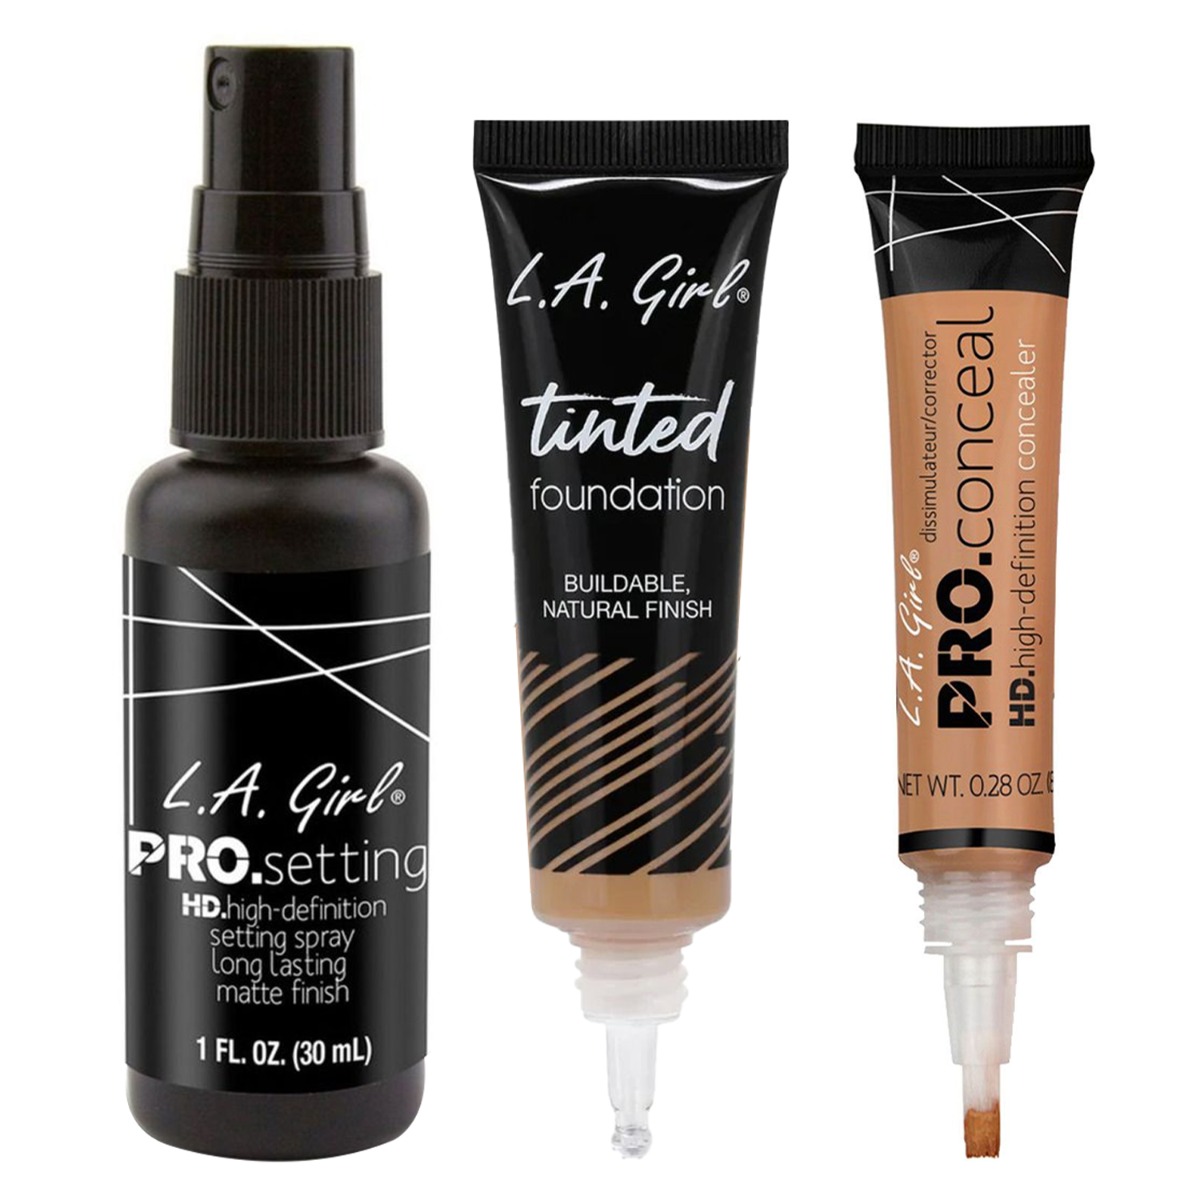 L.A. Girl Tinted Foundation - Tan 30ml, HD Pro Conceal 8gm-Almond & Pro Setting HD Matte Finish Spray 30ml